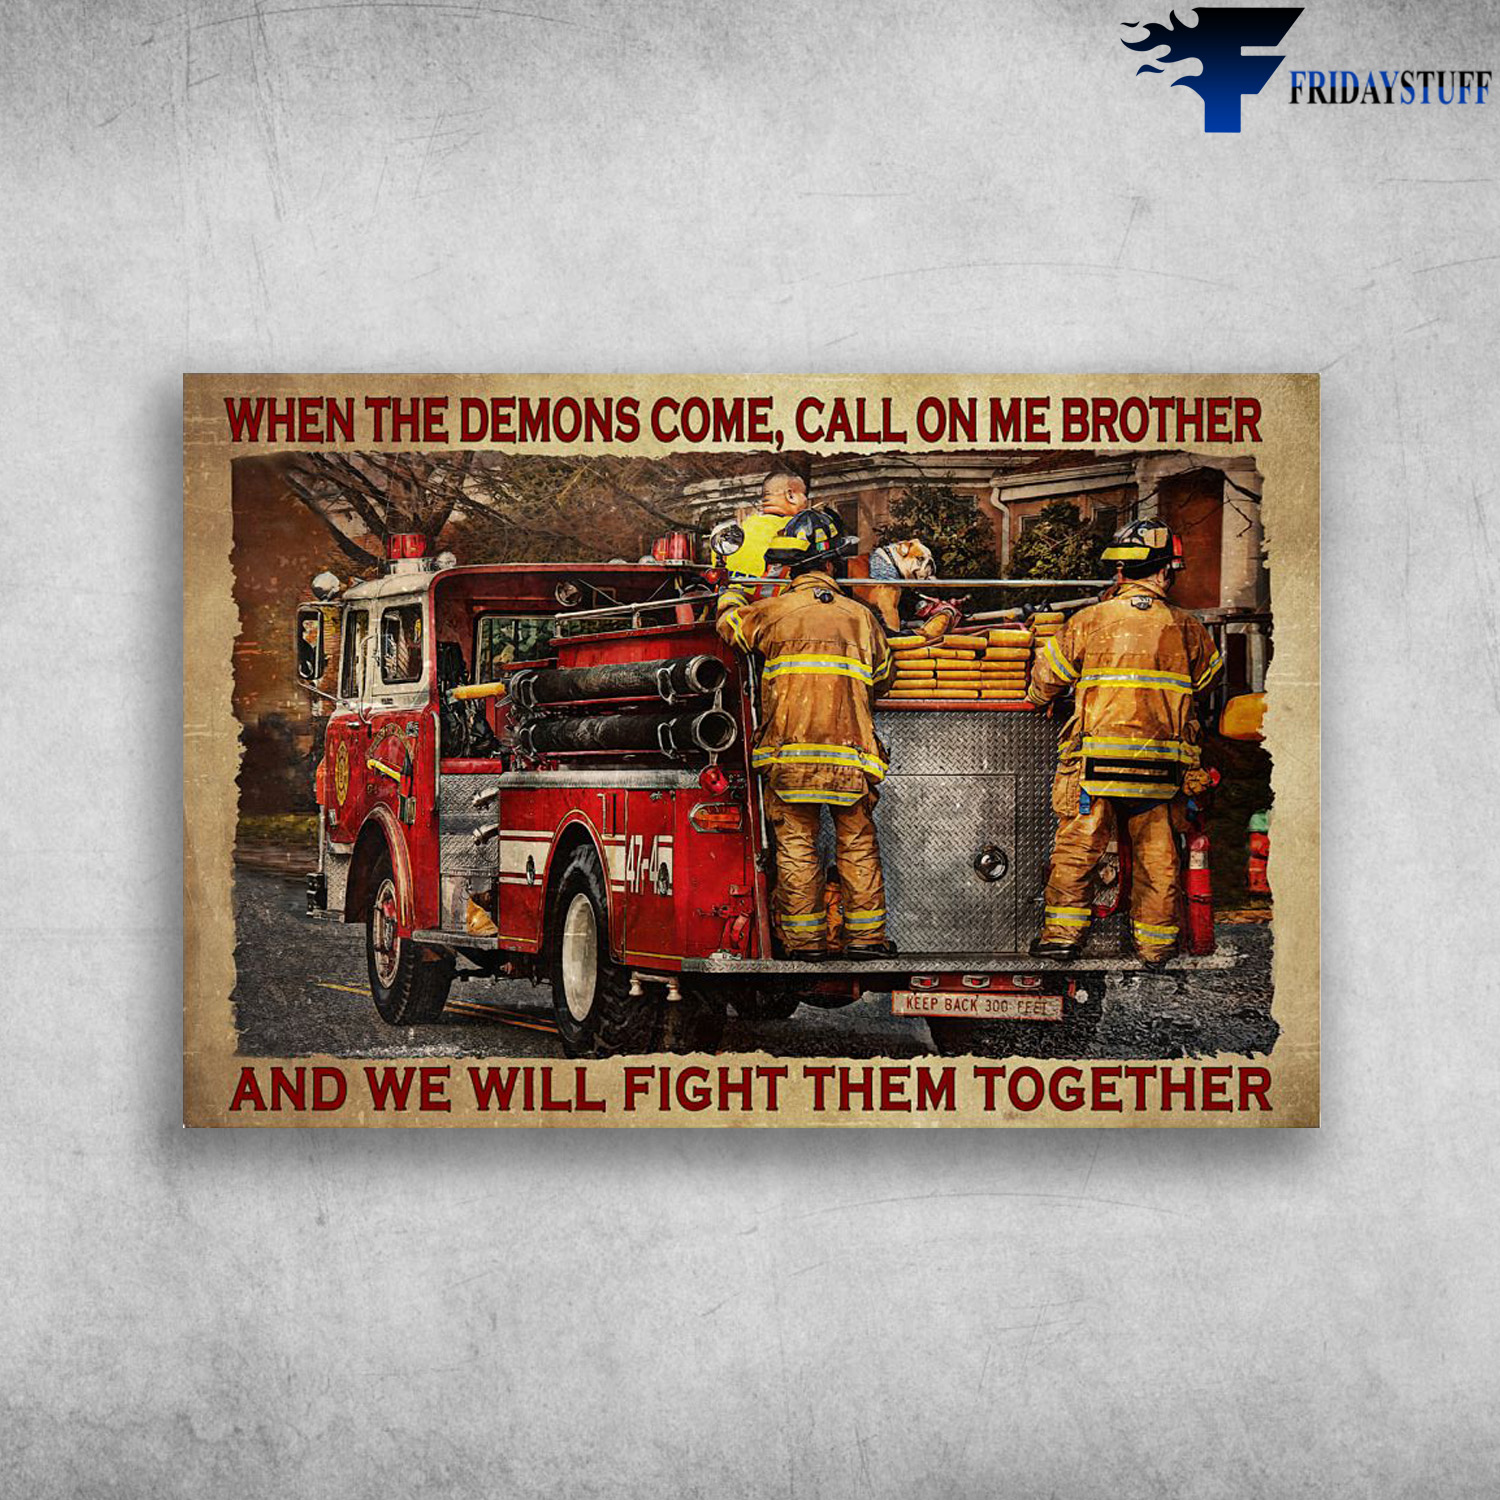 Firefighter At Work - When The Demins Come, Call On Me Brother, And We Will Fight Them Together